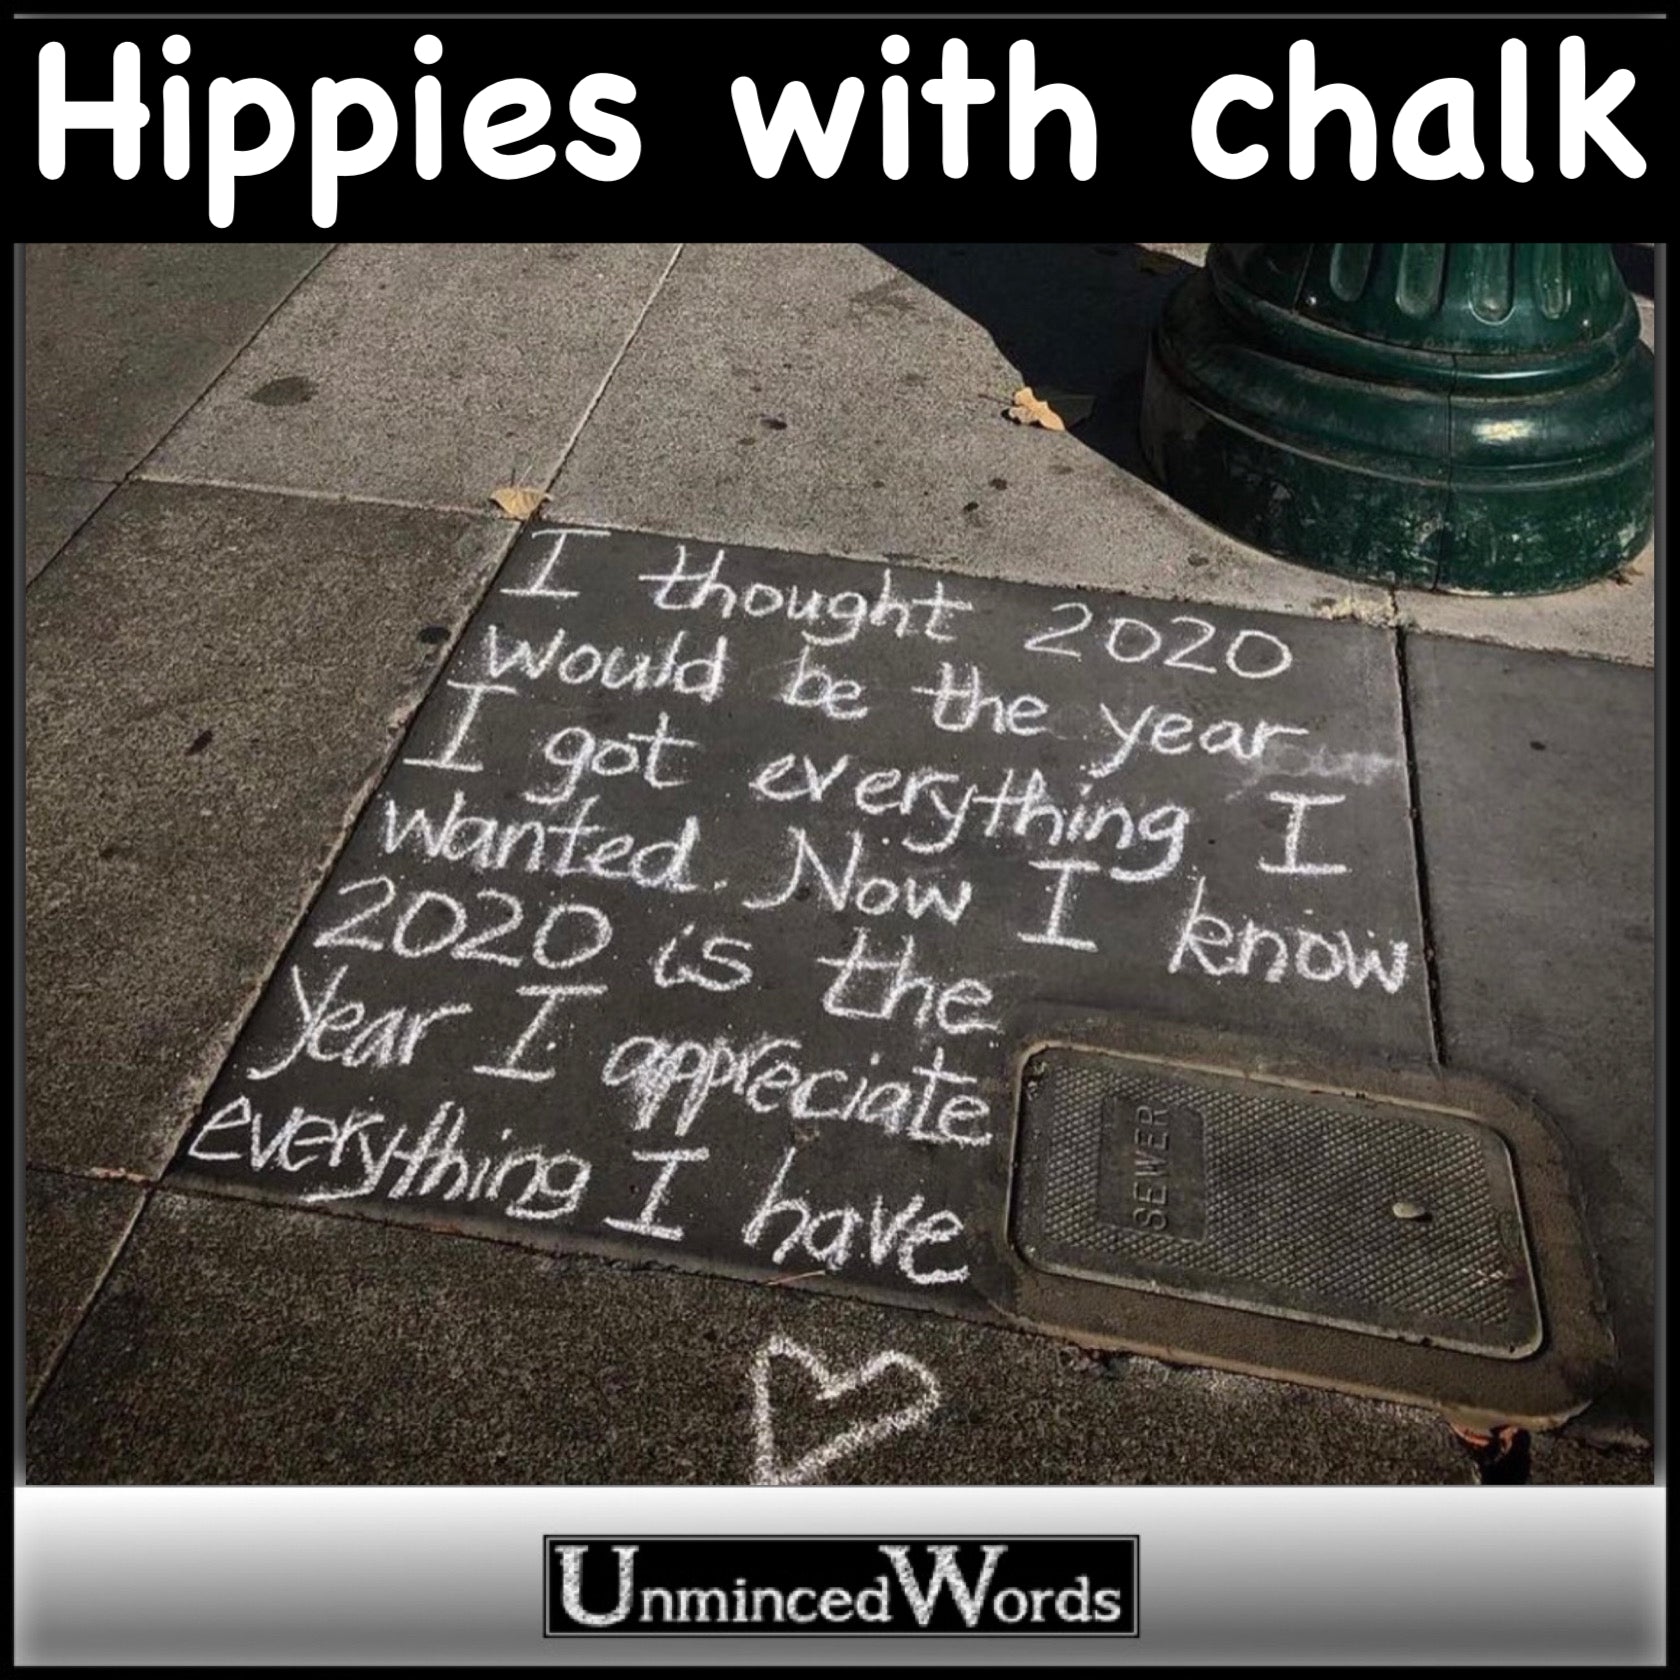 Hippies with chalk. Idealism and messages of love